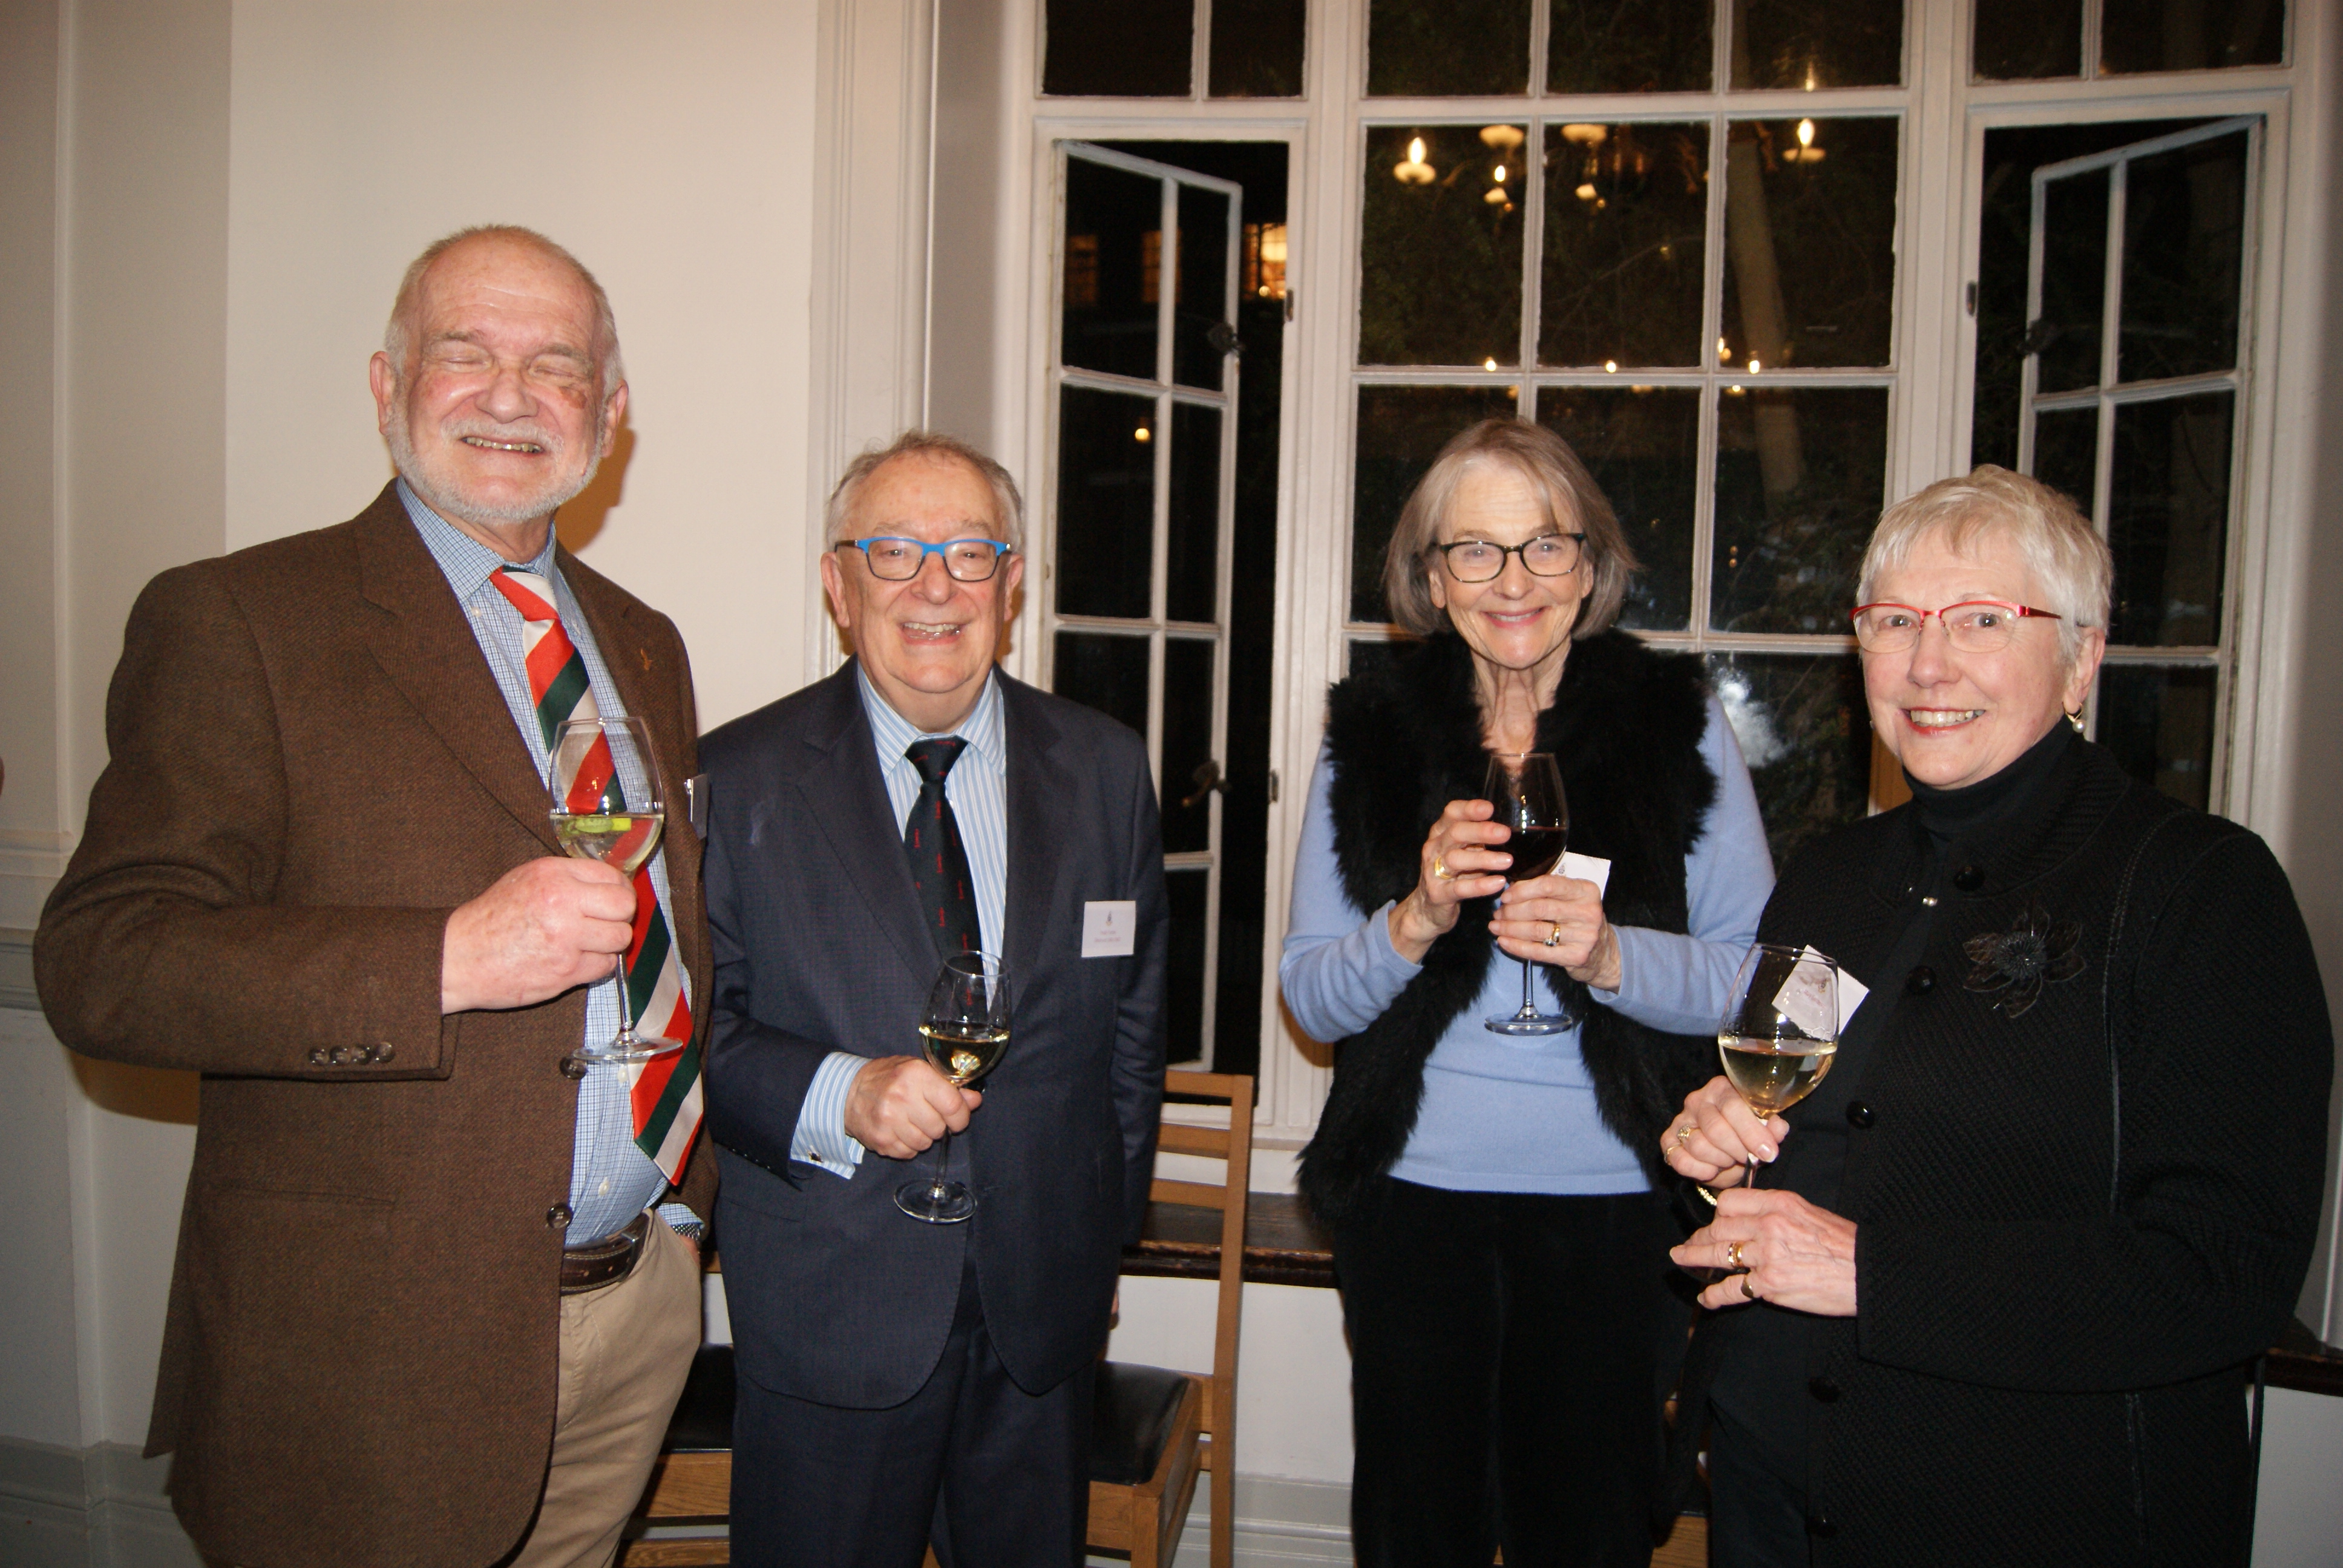 Ninth Annual Foundation Lecture at the Royal Geographical Society, March 2018